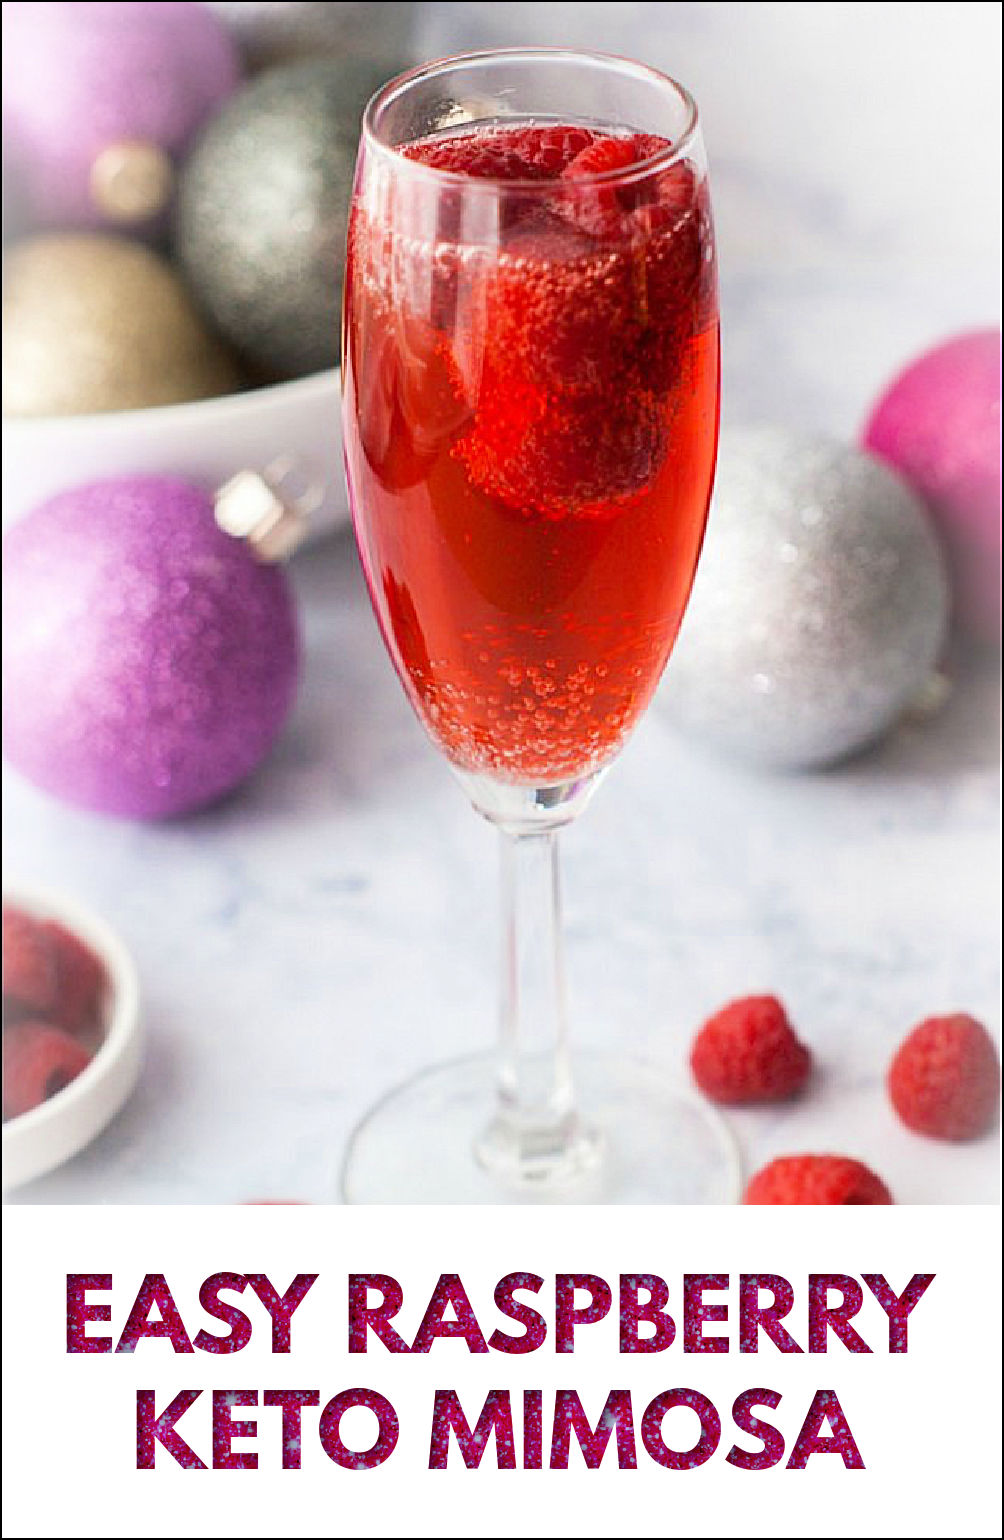 glass of raspberry mimosa drink with fresh raspberries and Christmas bulbs in the background with text